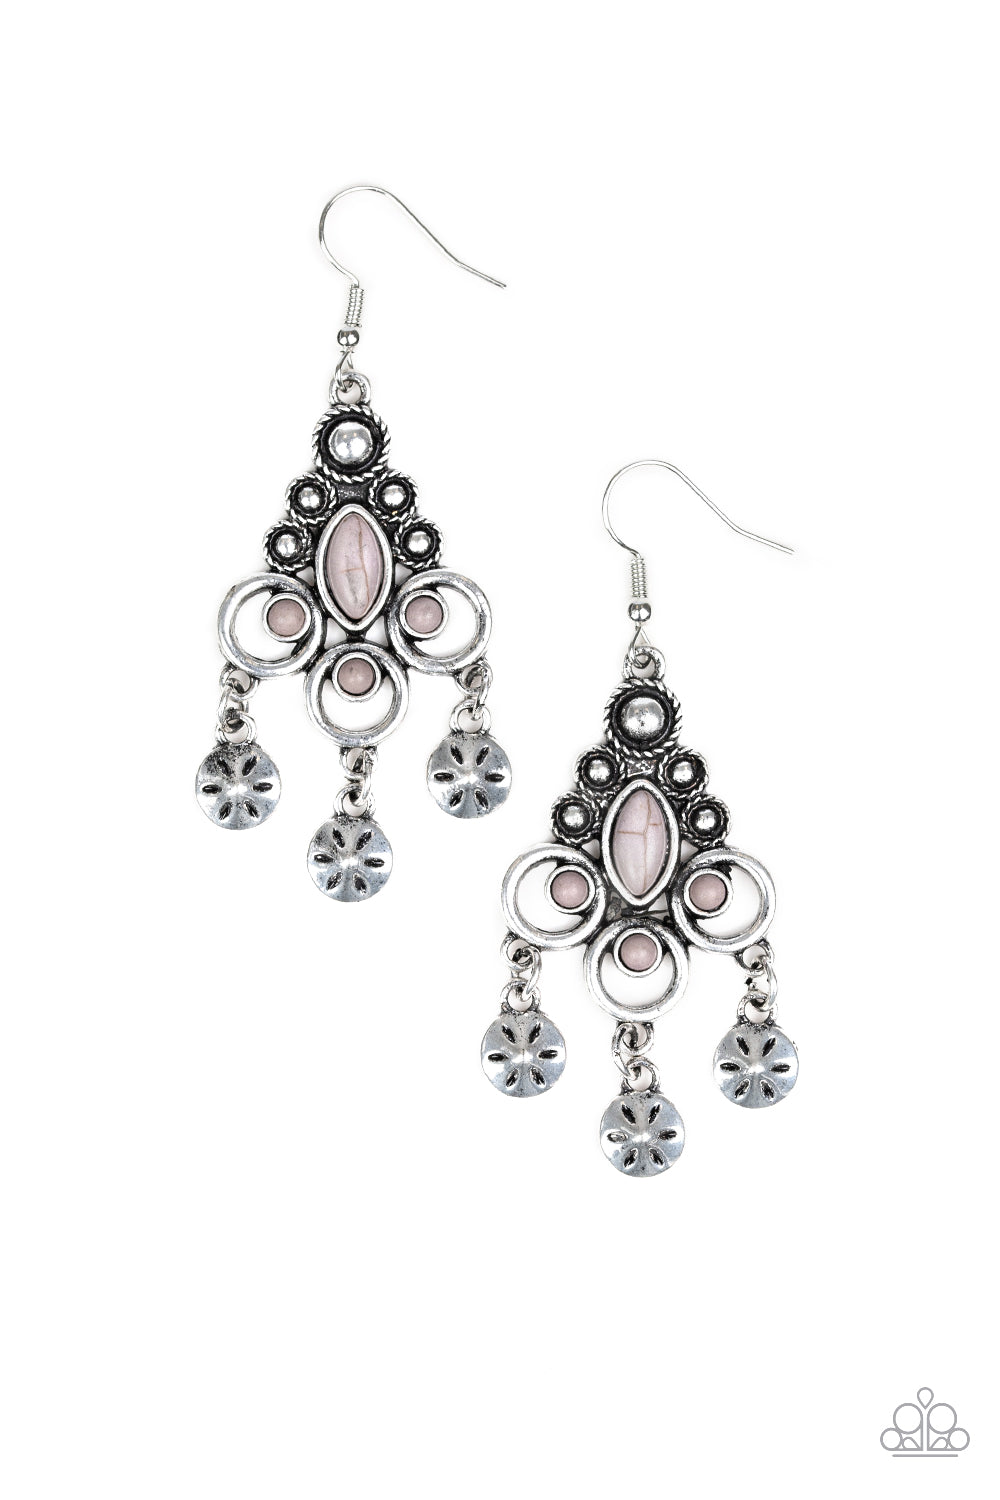 Southern Expressions Silver Earrings Paparazzi